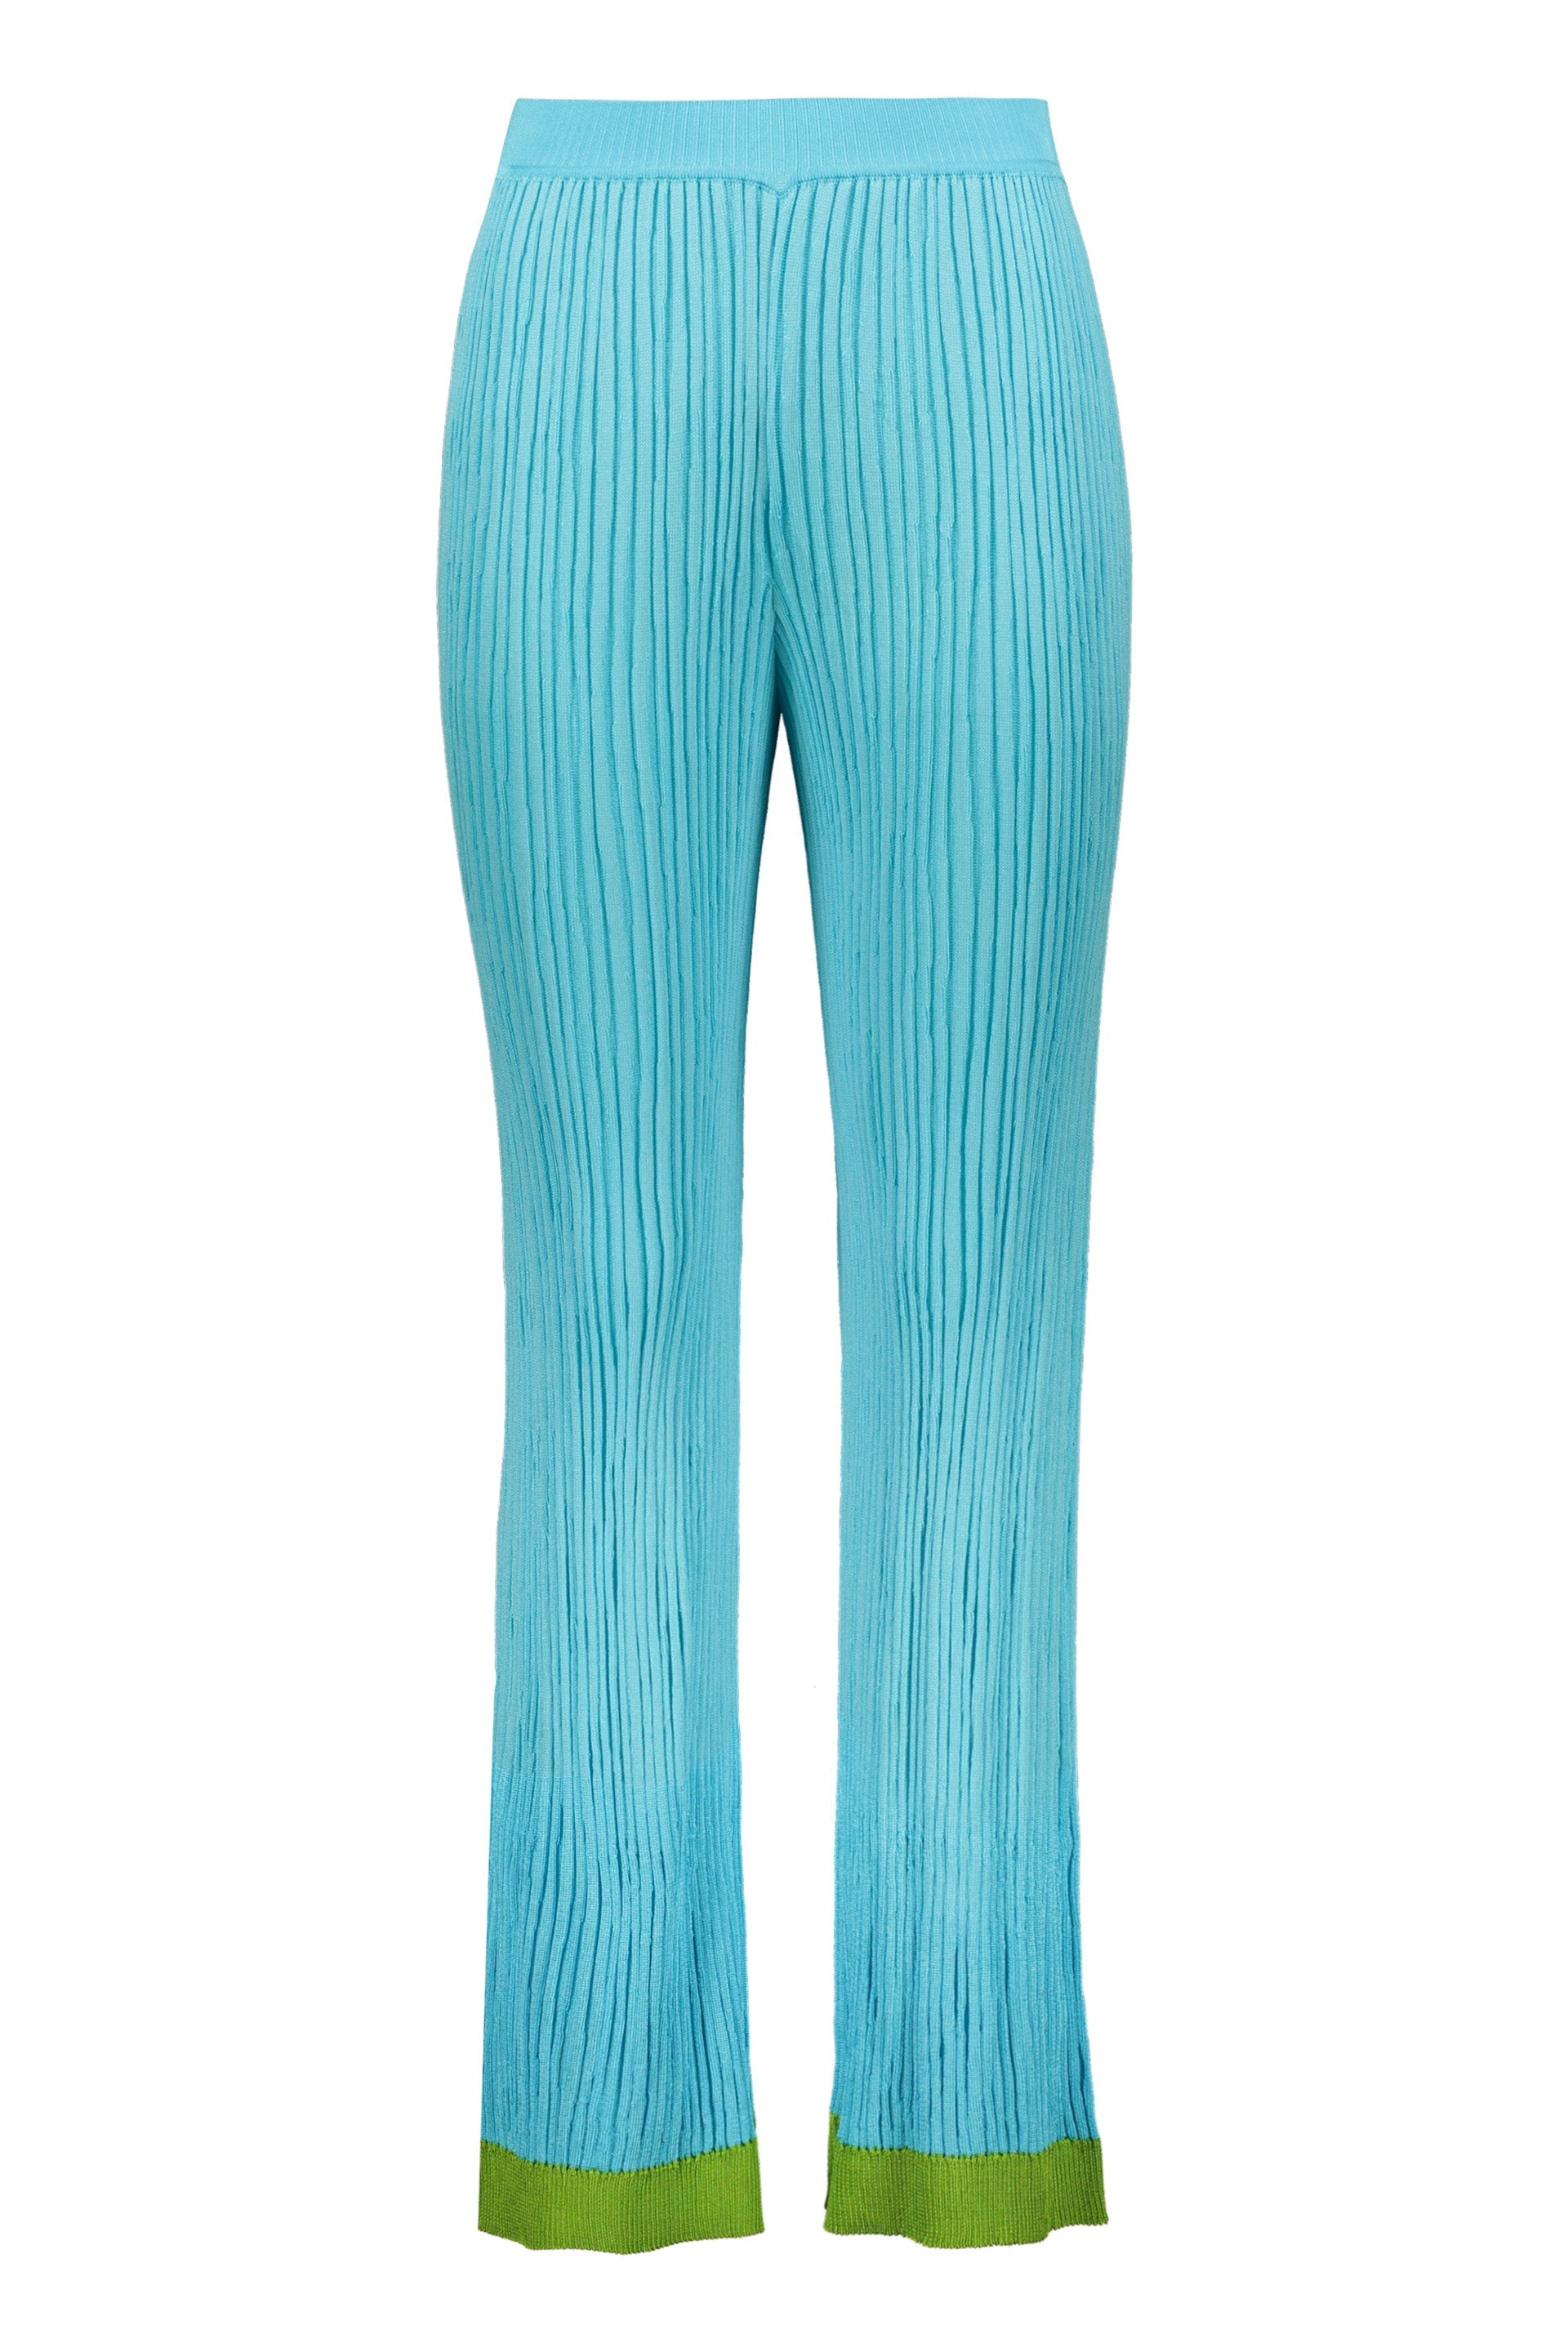 Missoni-OUTLET-SALE-Knitted-trousers-Hosen-40-ARCHIVE-COLLECTION_bf5ef7f7-165b-42c9-9209-15757ca8de68.jpg